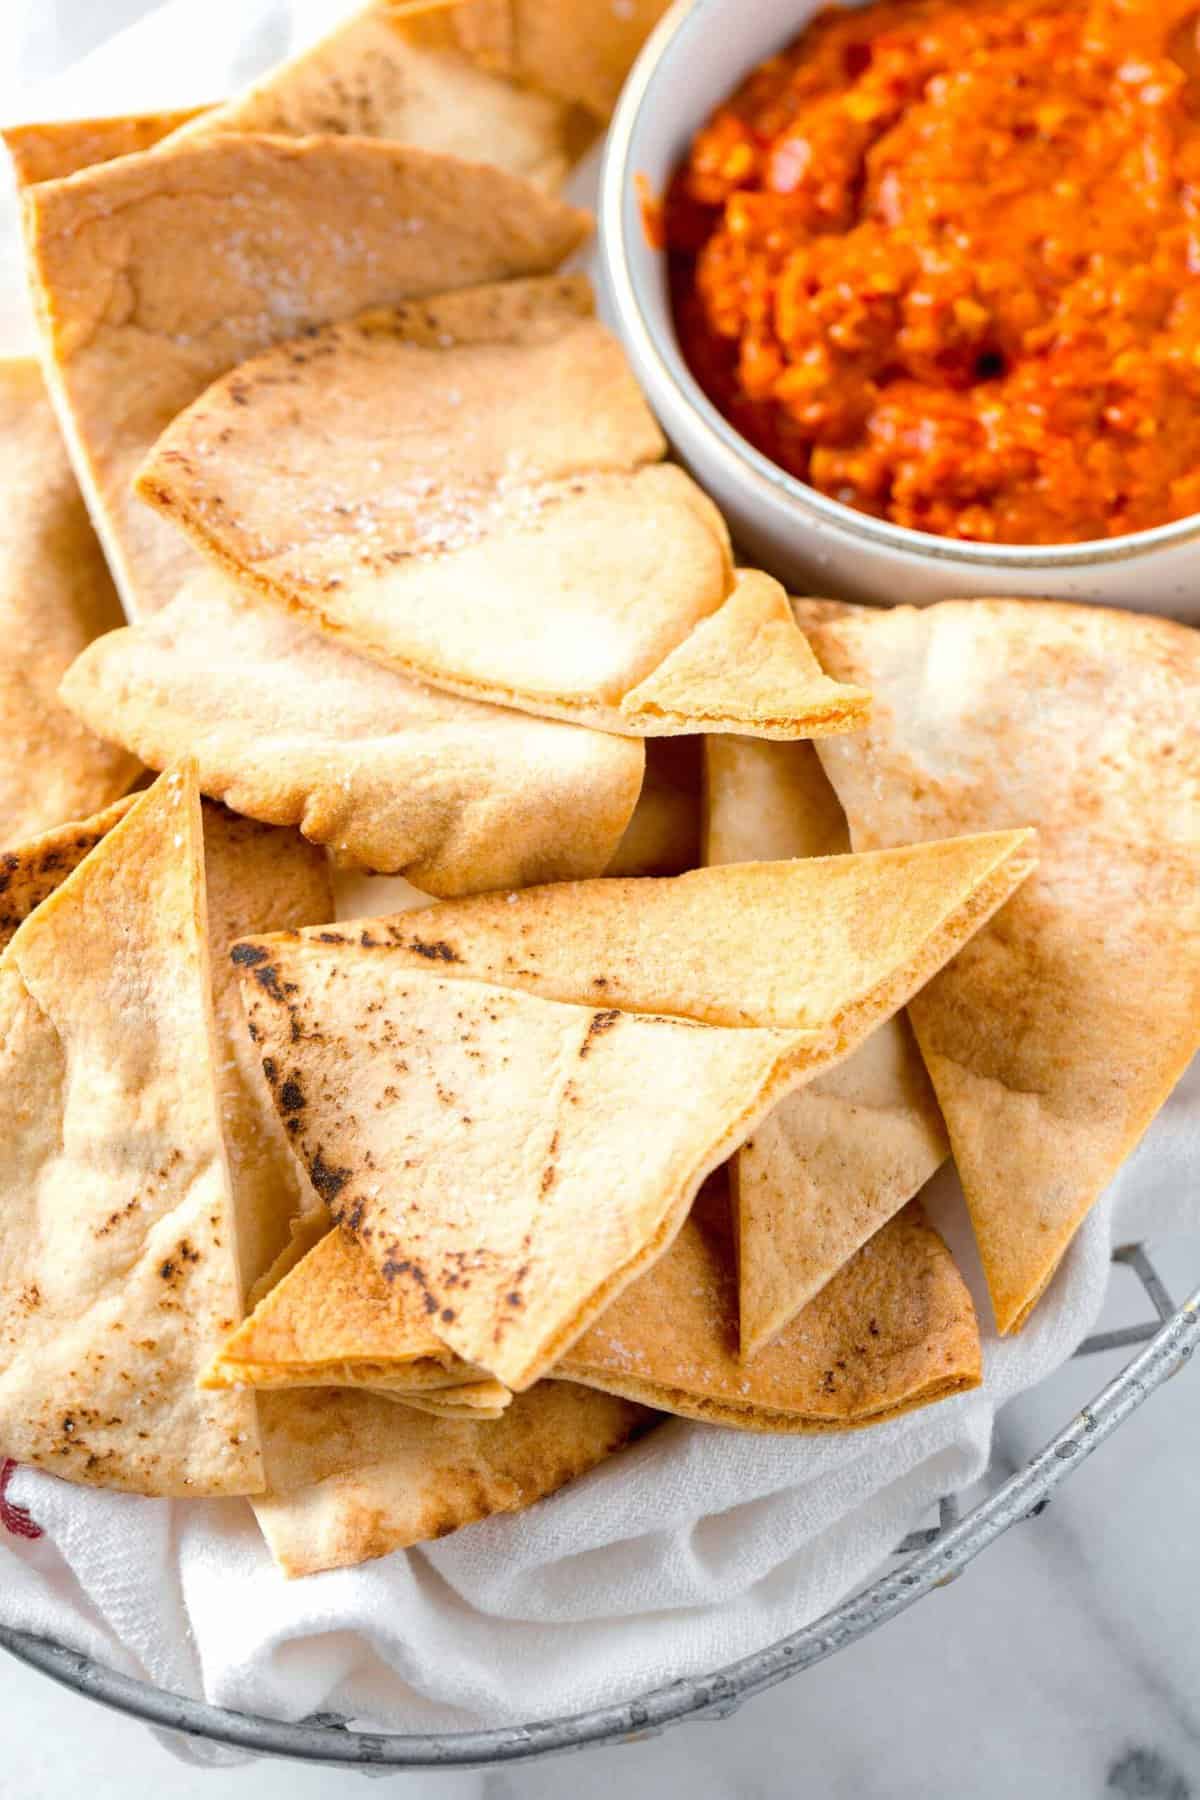 air fried pita chips in a metal basket next to a red pepper dip